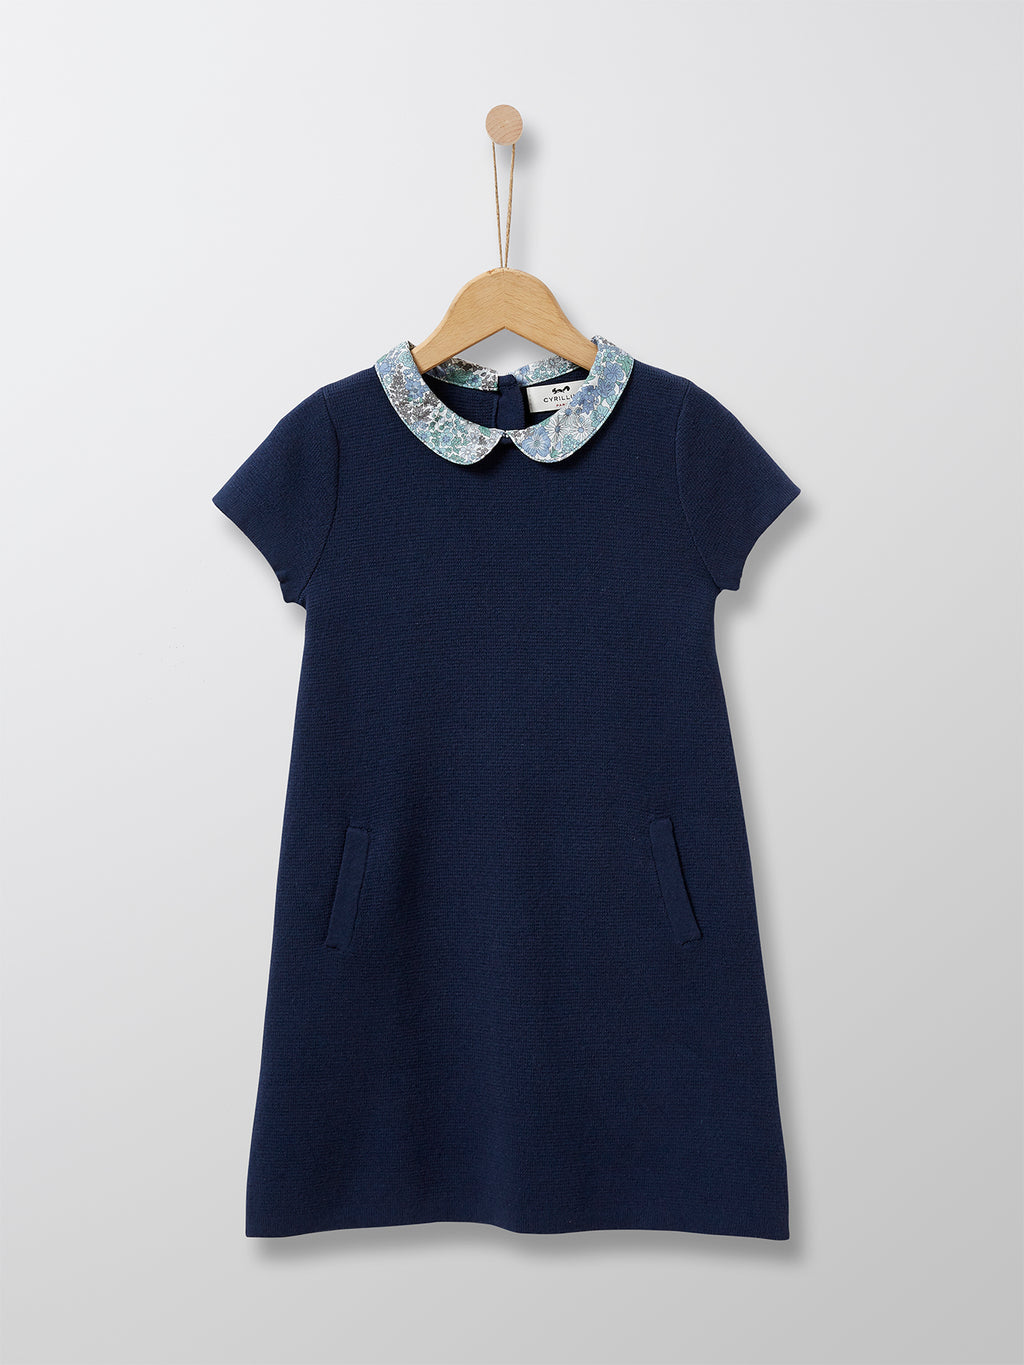 This 100% cotton Navy knit dress is adorned with an elegant collar in Liberty floral fabric. This classic Parisian dress is ideal for special occasions and every day chic wear alike.